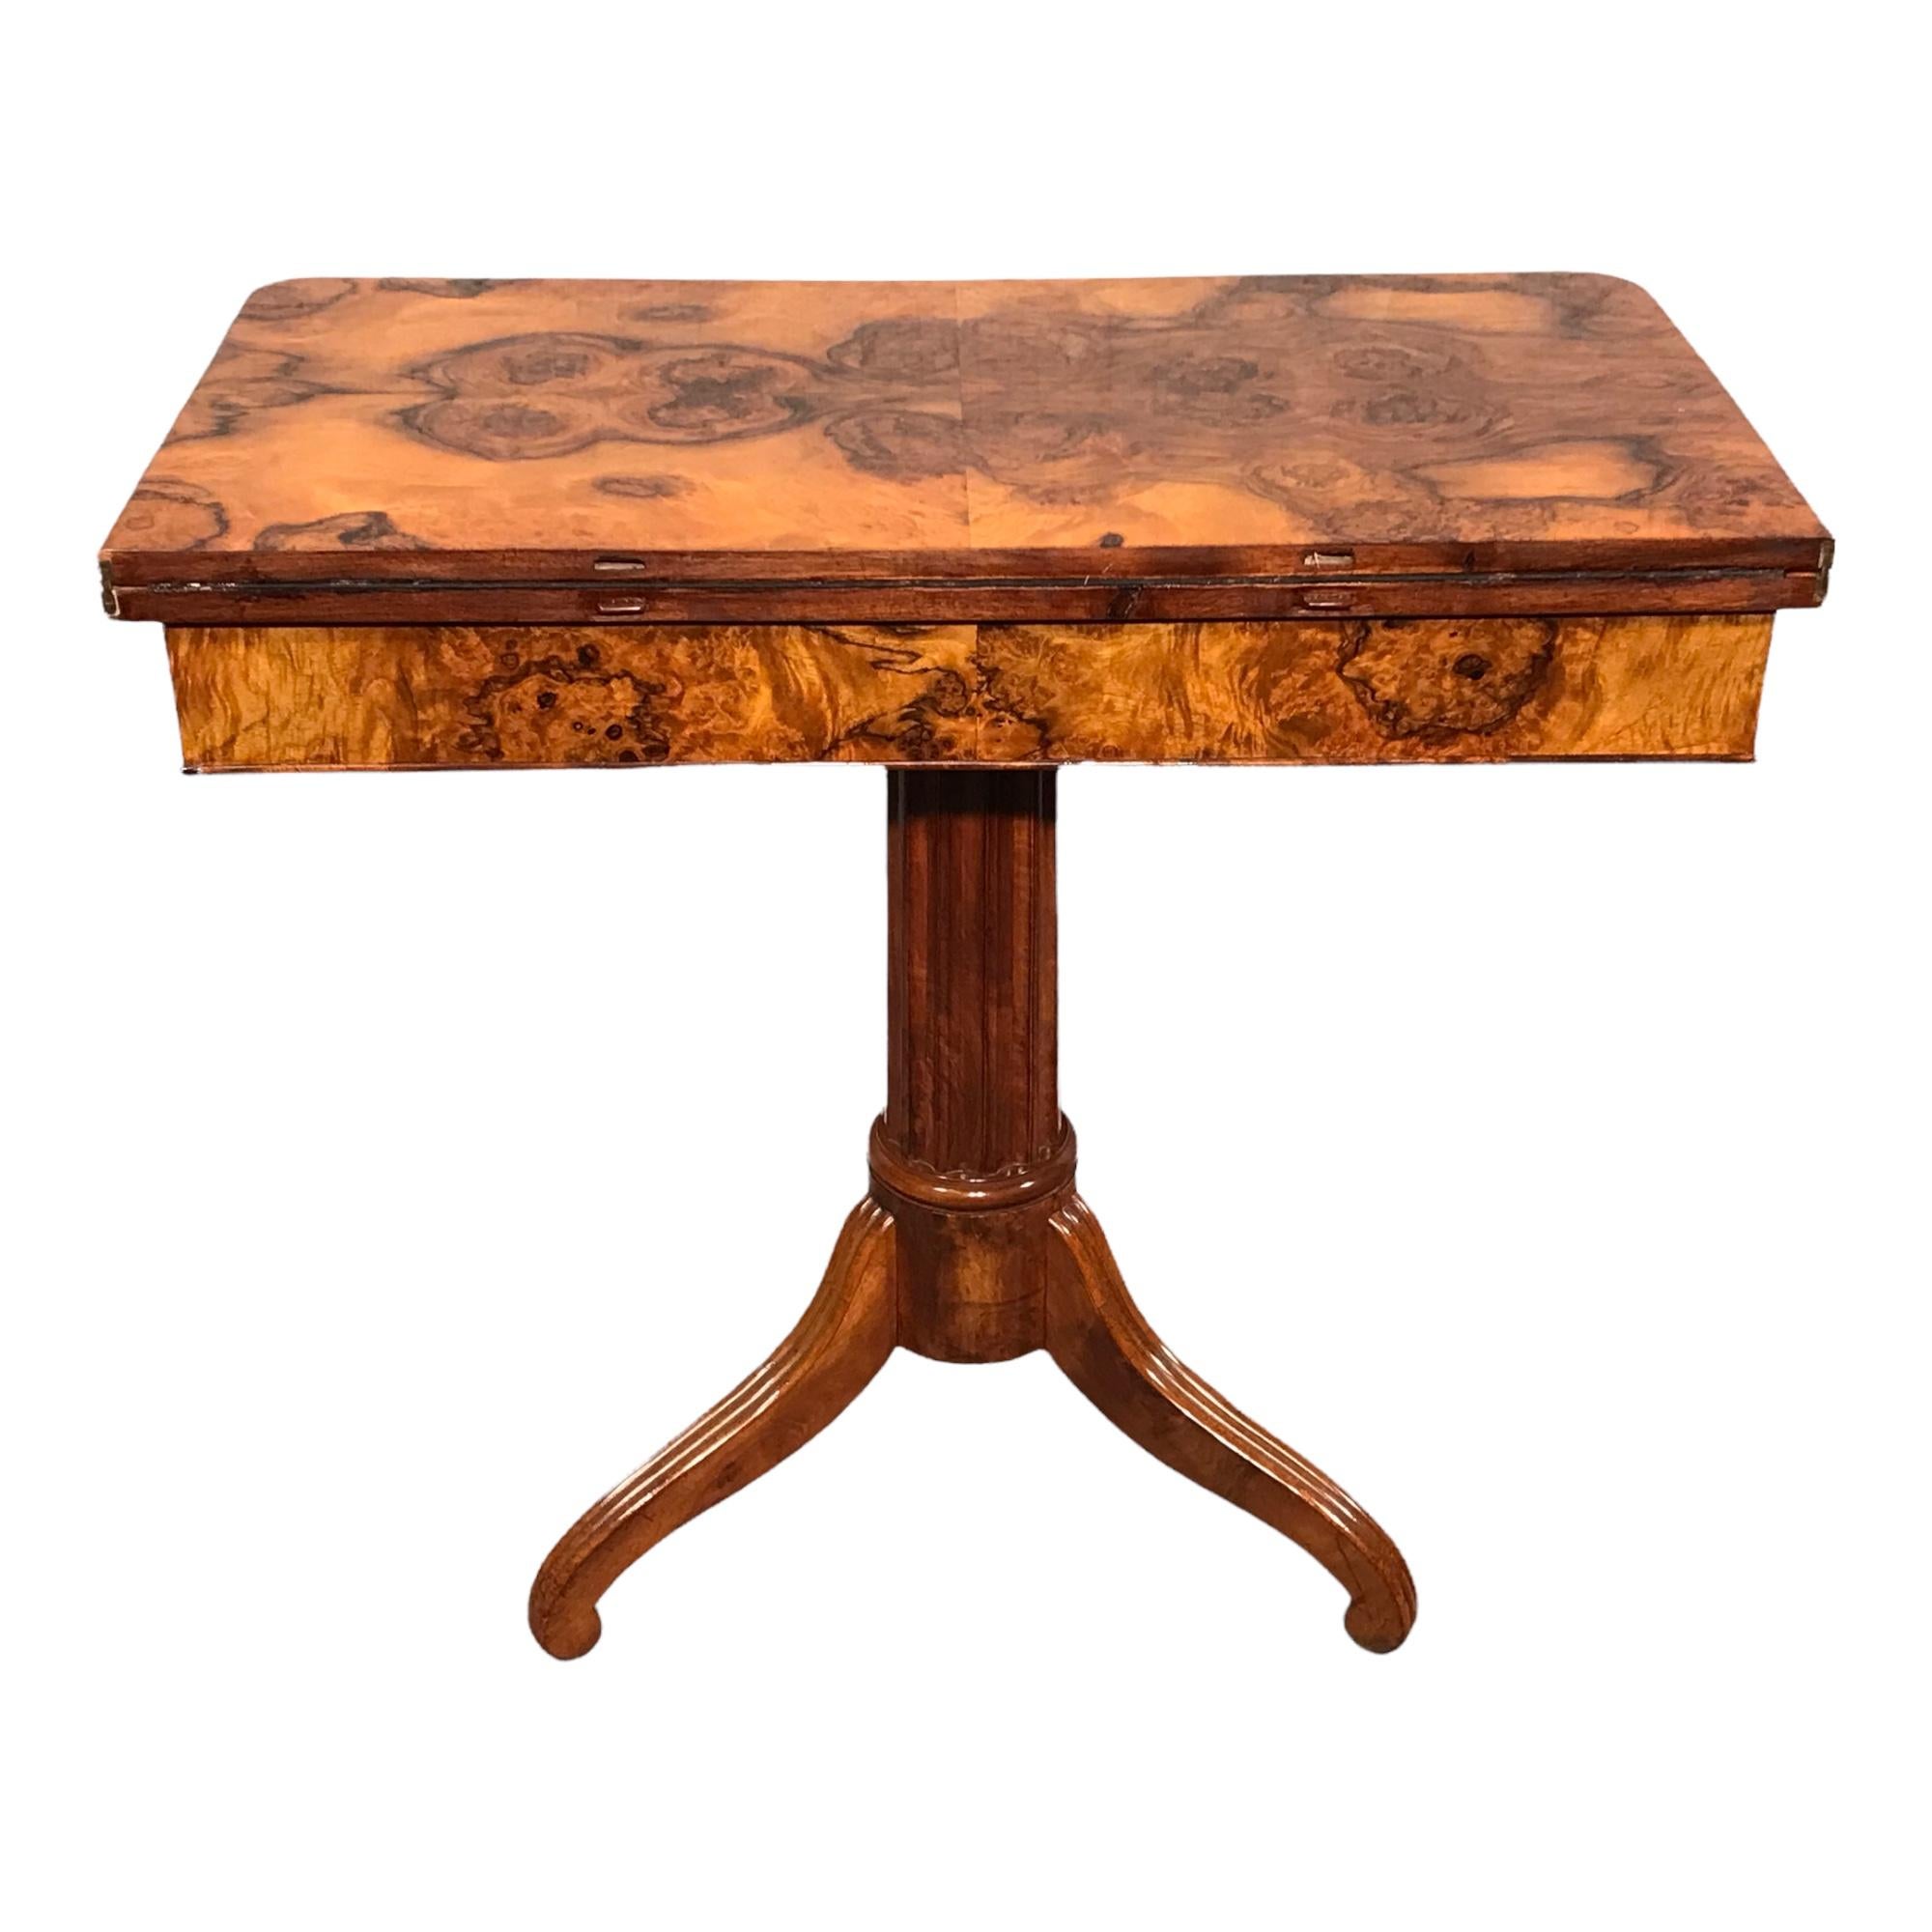 This unique game table dates back to the early phase of the Biedermeier period. 
It comes from Southern Germany. The game table has a beautiful walnut root veneer on top and apron. It stands on a central fluted column foot with a tripod base. The